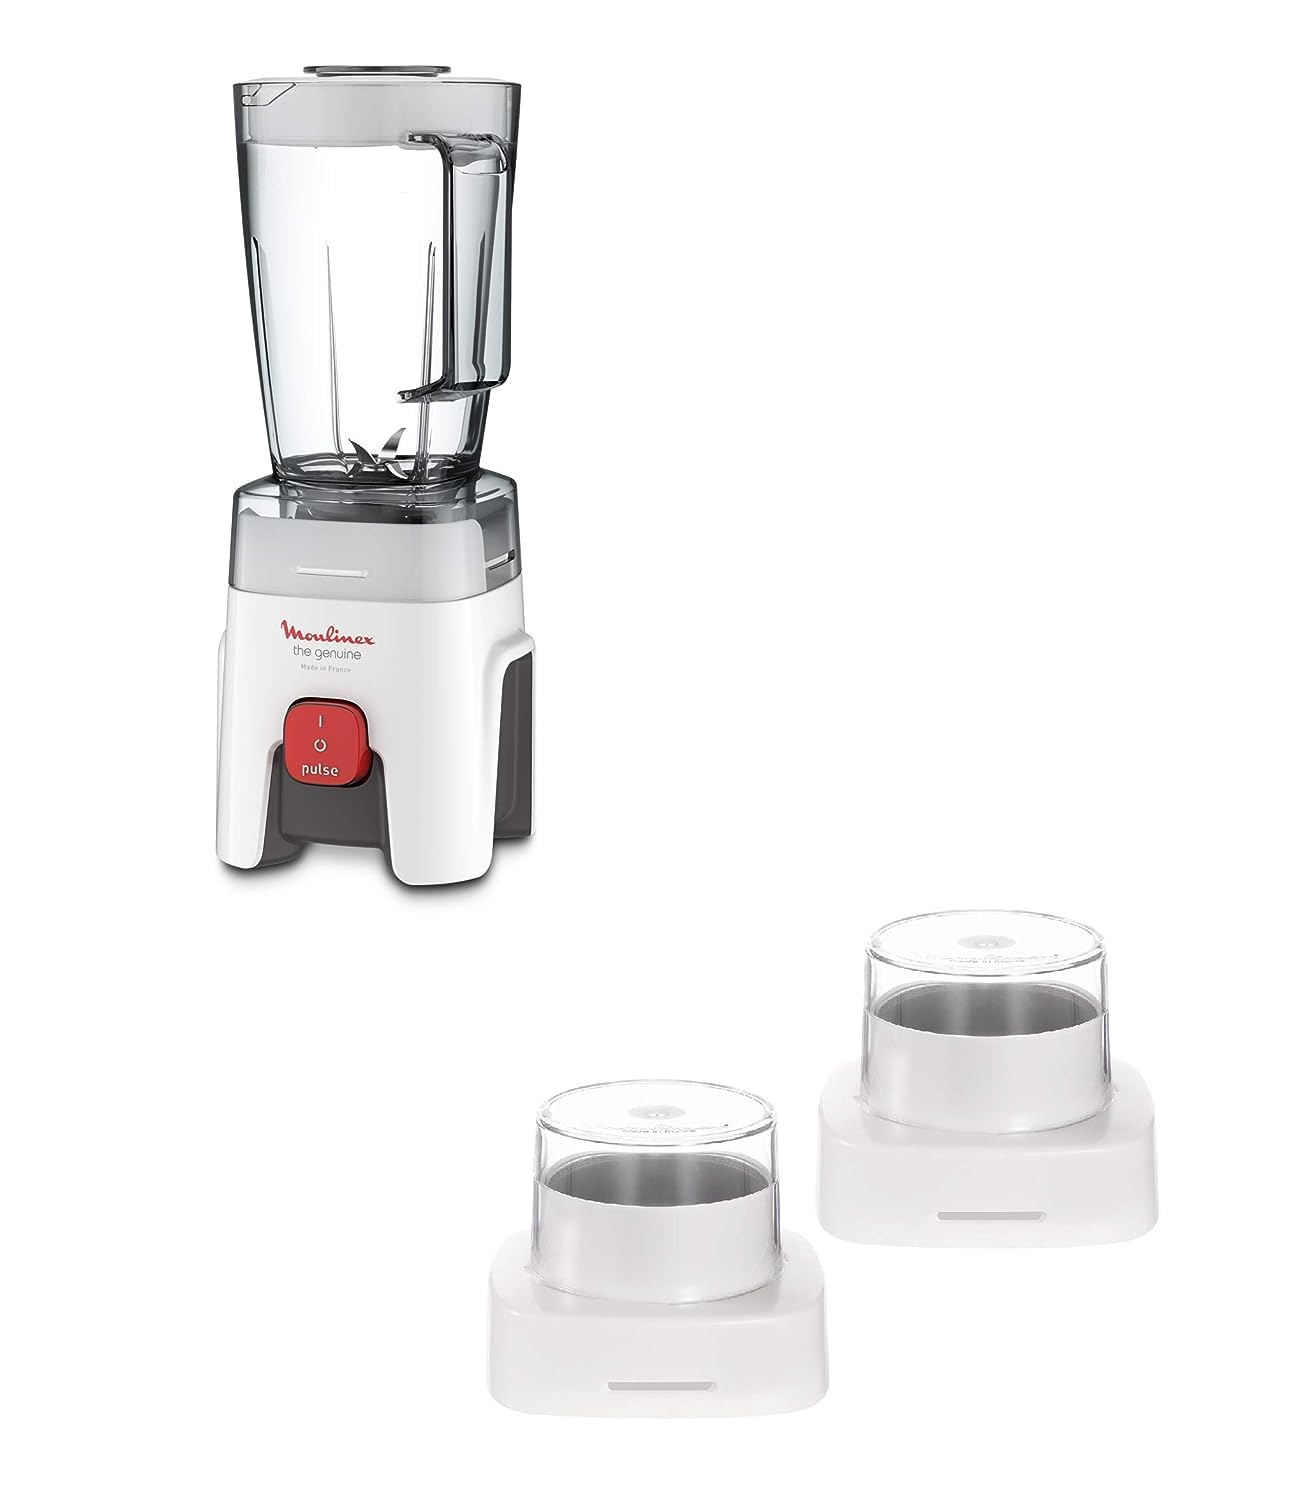 Moulinex Blender, Genuine Blender mixer, with Grinder and Grater Accessories, One Speed and Pulse Function,White,1.75 L , LM242B28